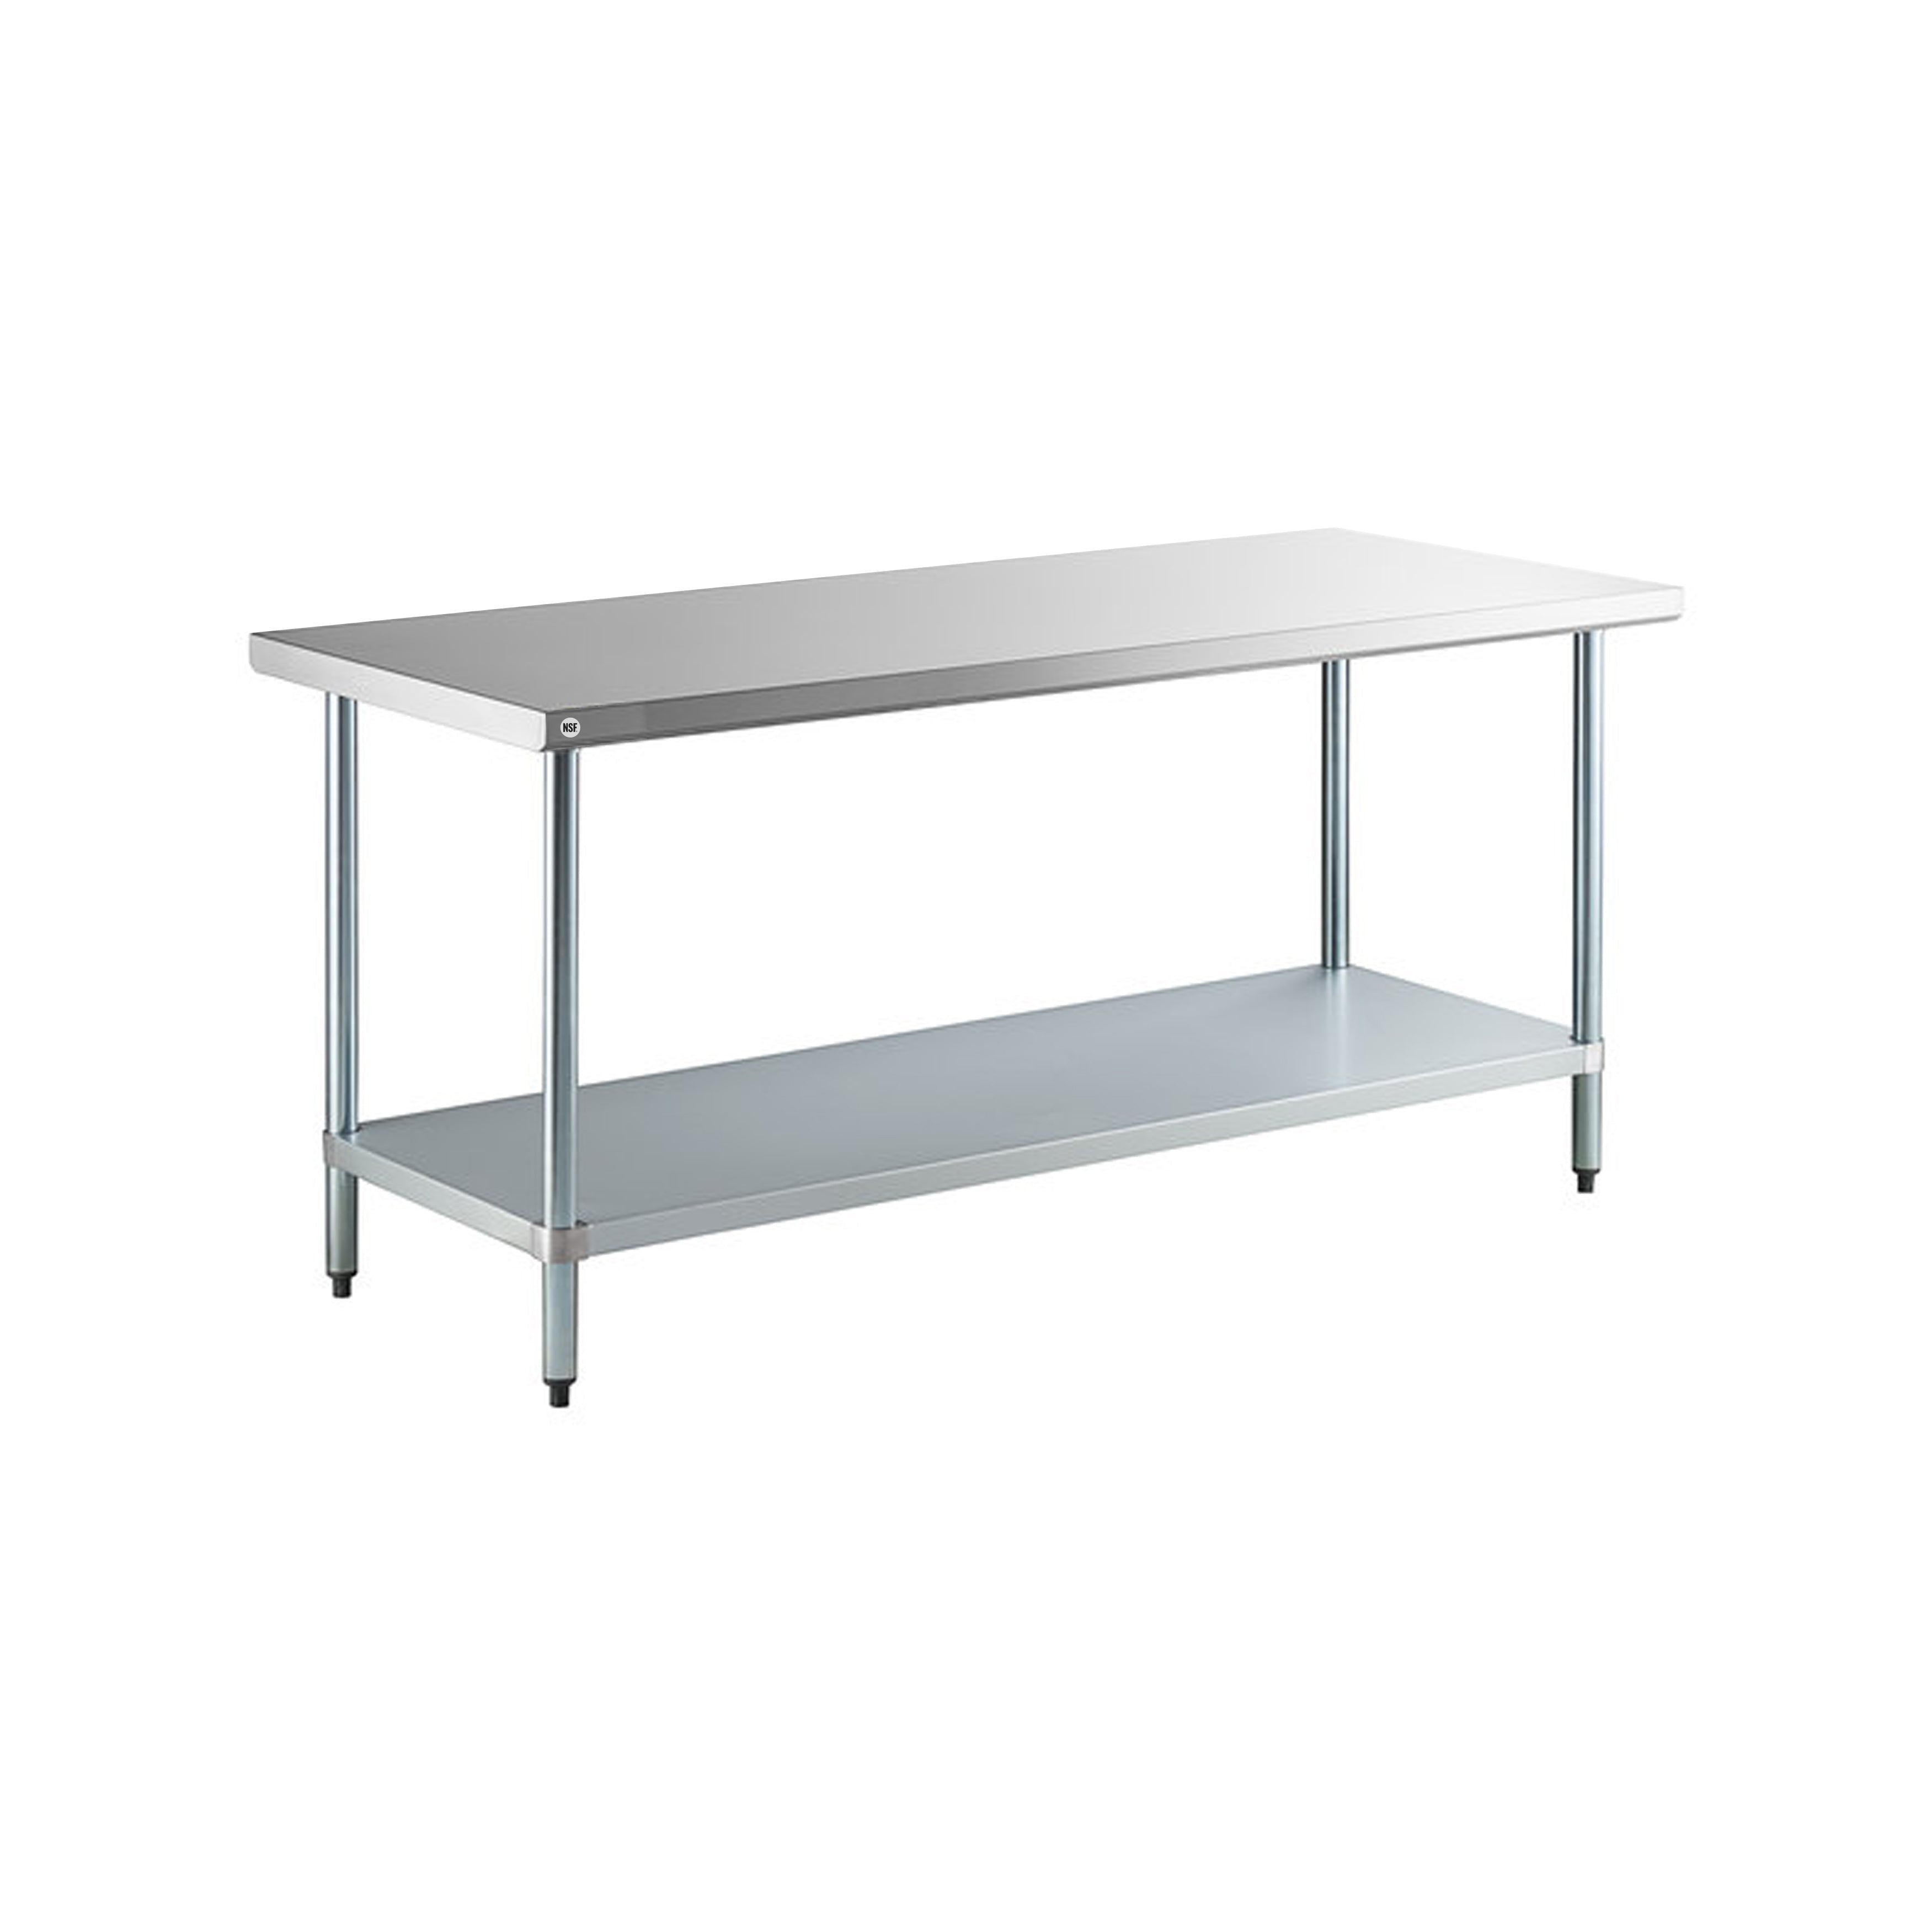 Omcan - 22068, Commercial 24" x 72" Stainless Steel Kitchen Work Table 1200lbs Light Duty